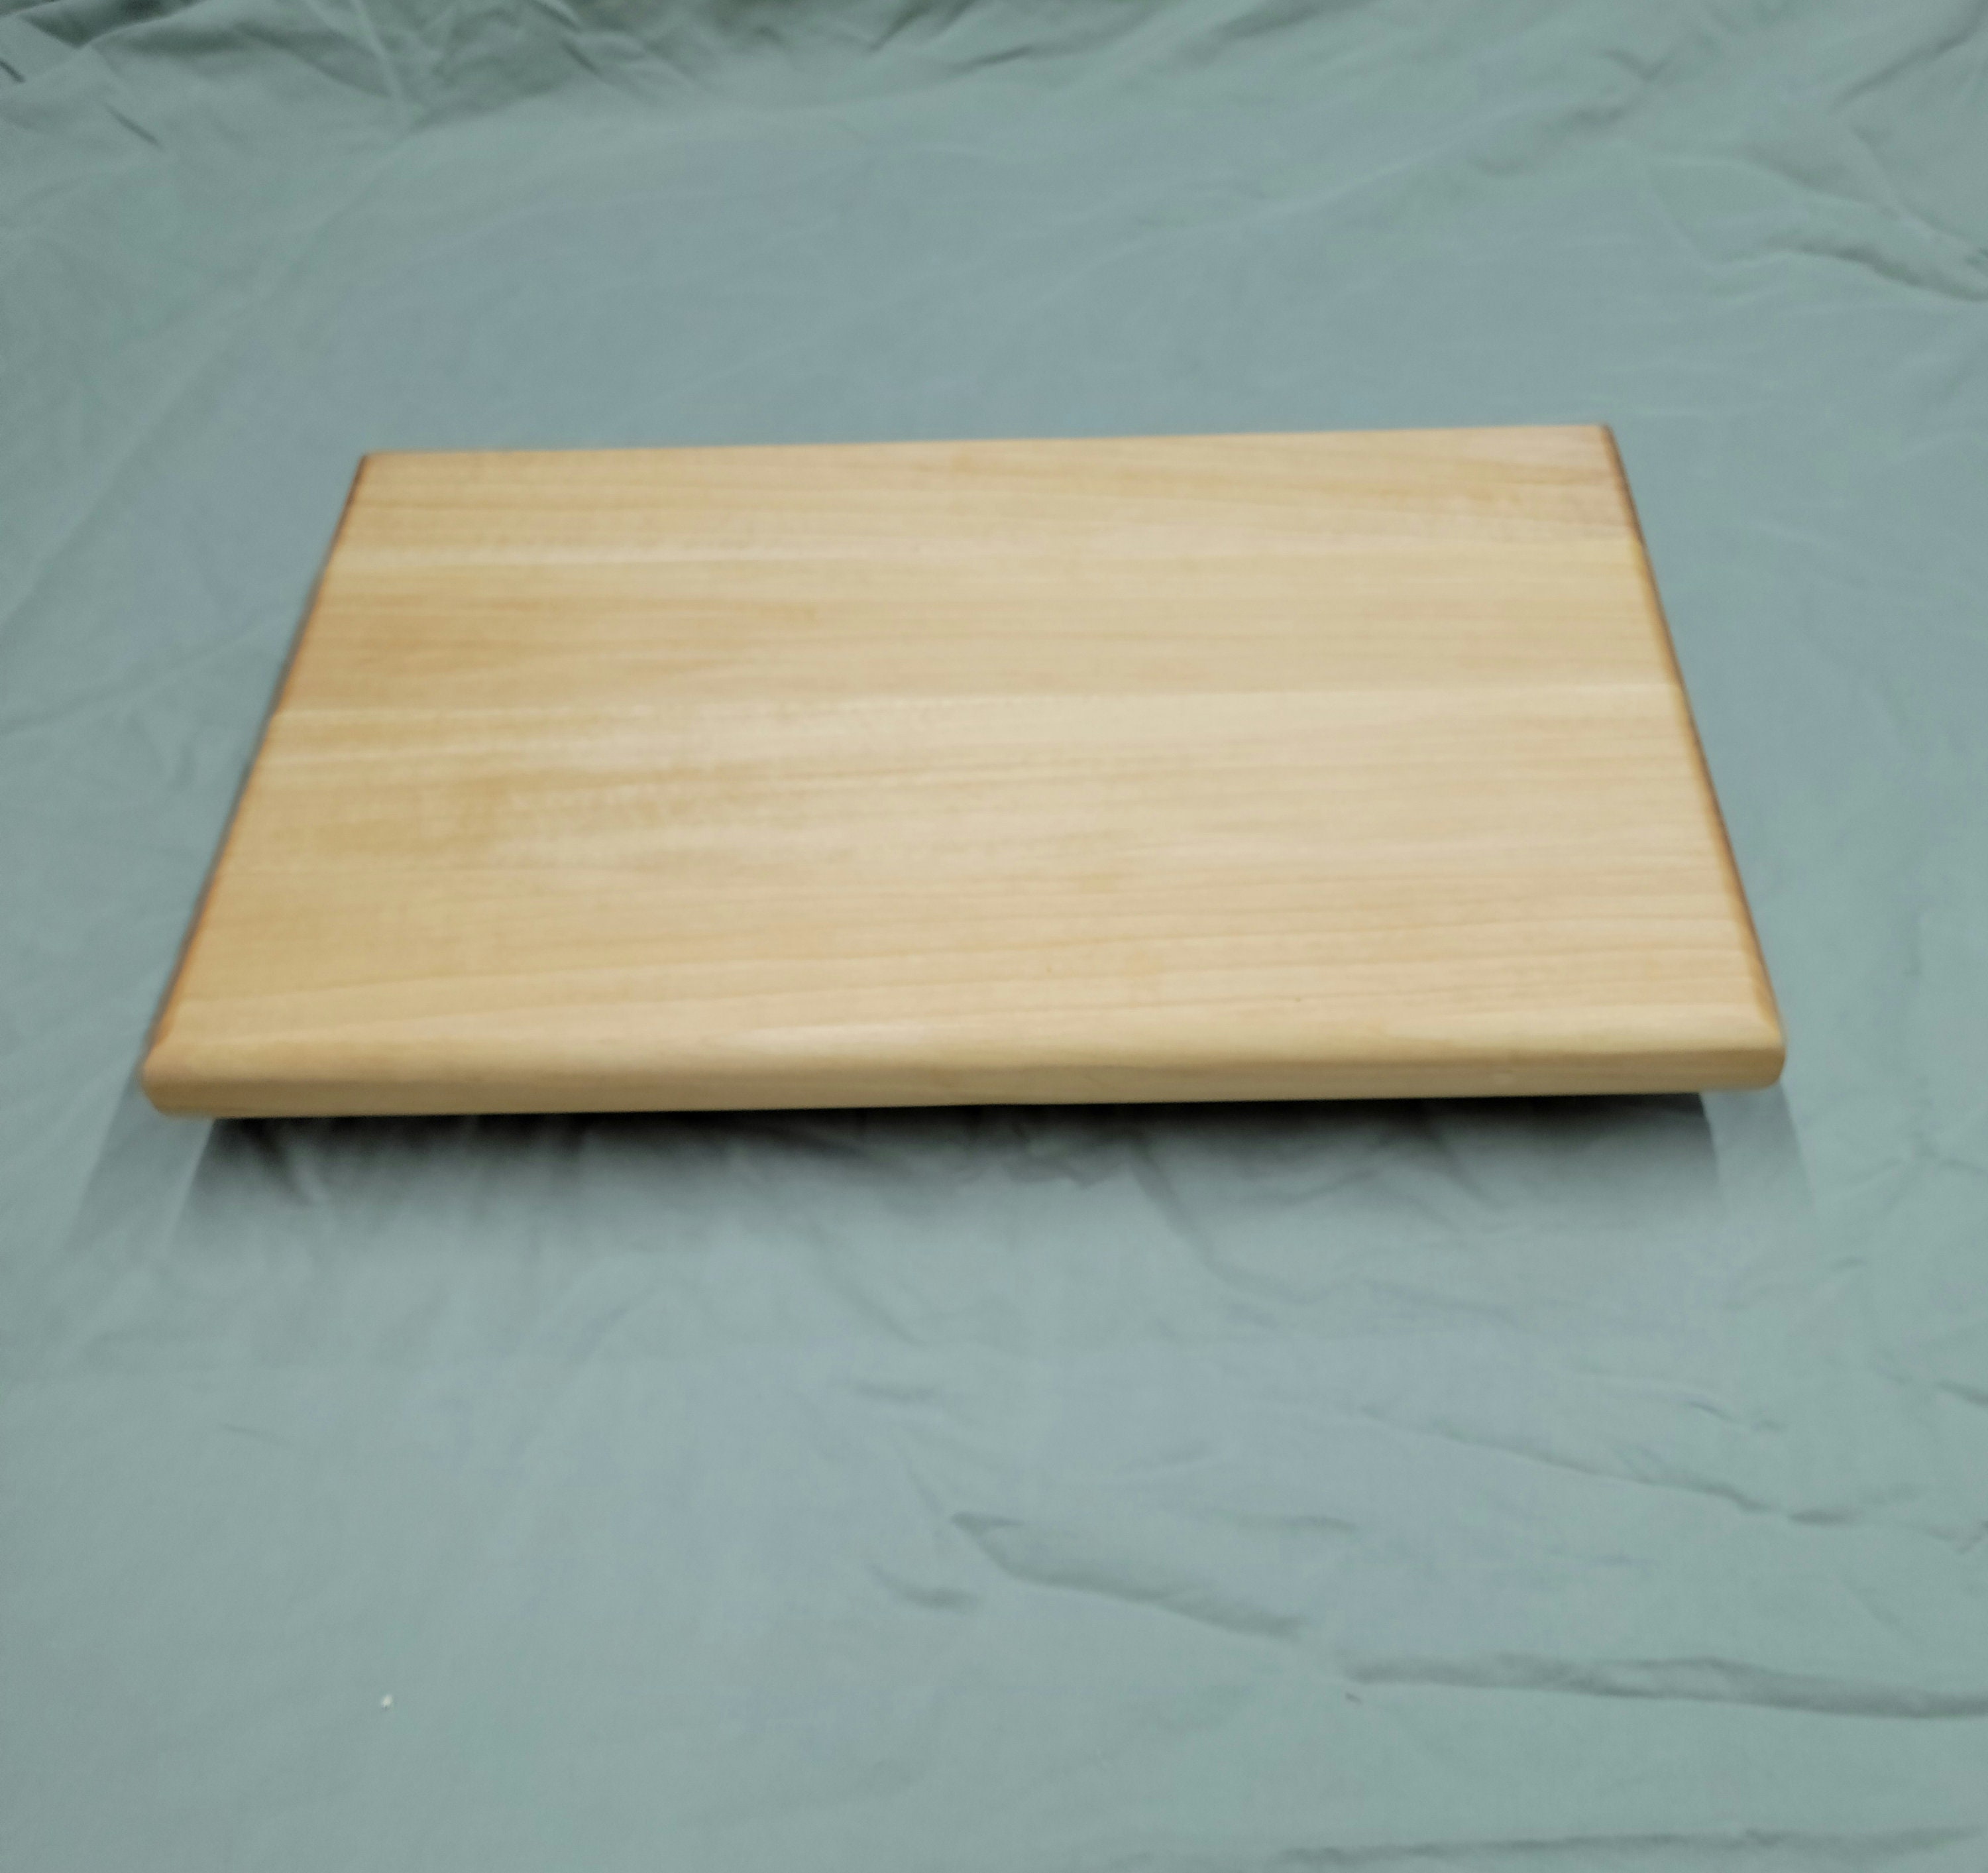 Basswood Sheets 12X8X1/16 8 Pack for Arts and Crafts DIY Models or